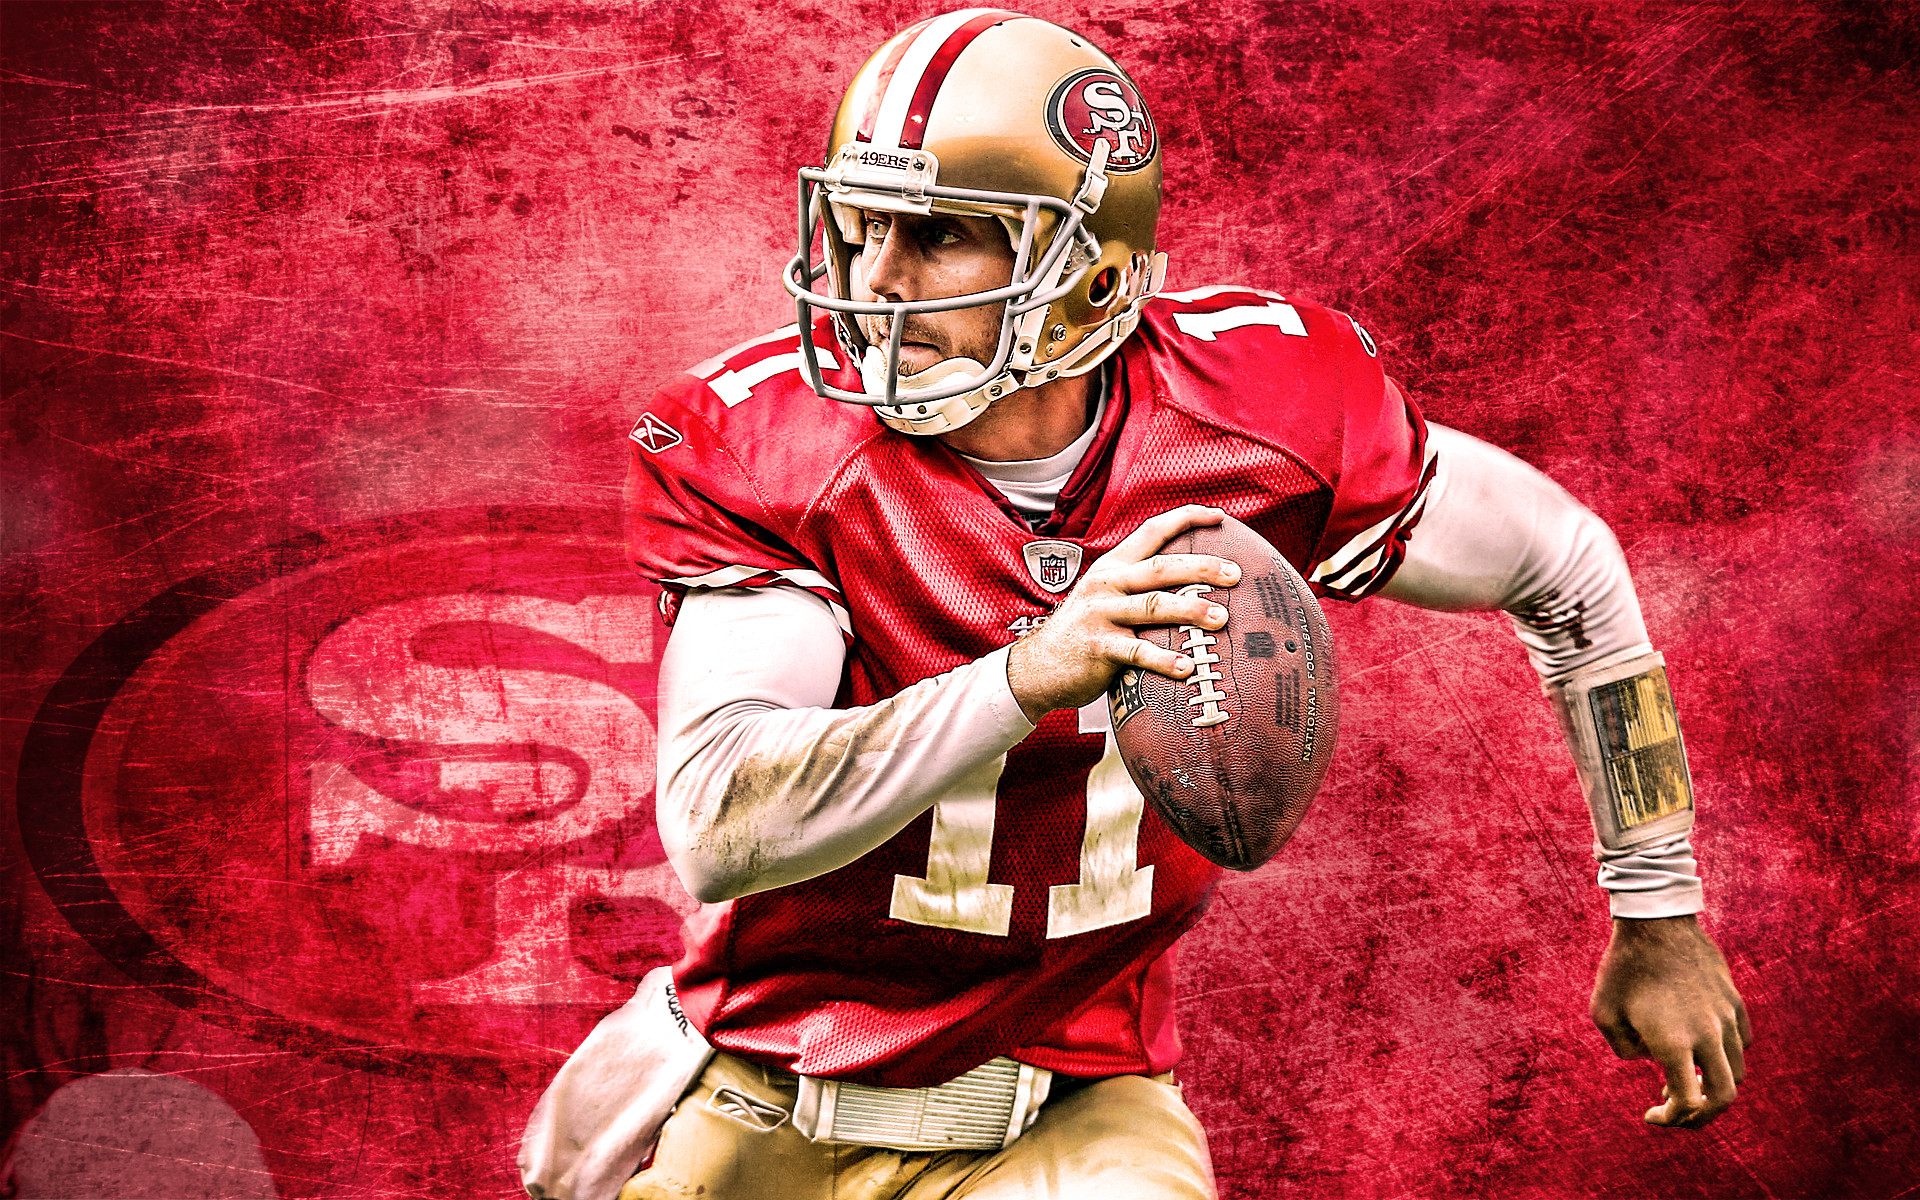 49er Radio 49ers Wallpapers 49ers Images 49ers Hd Wallpapers - San Francisco 49ers - HD Wallpaper 